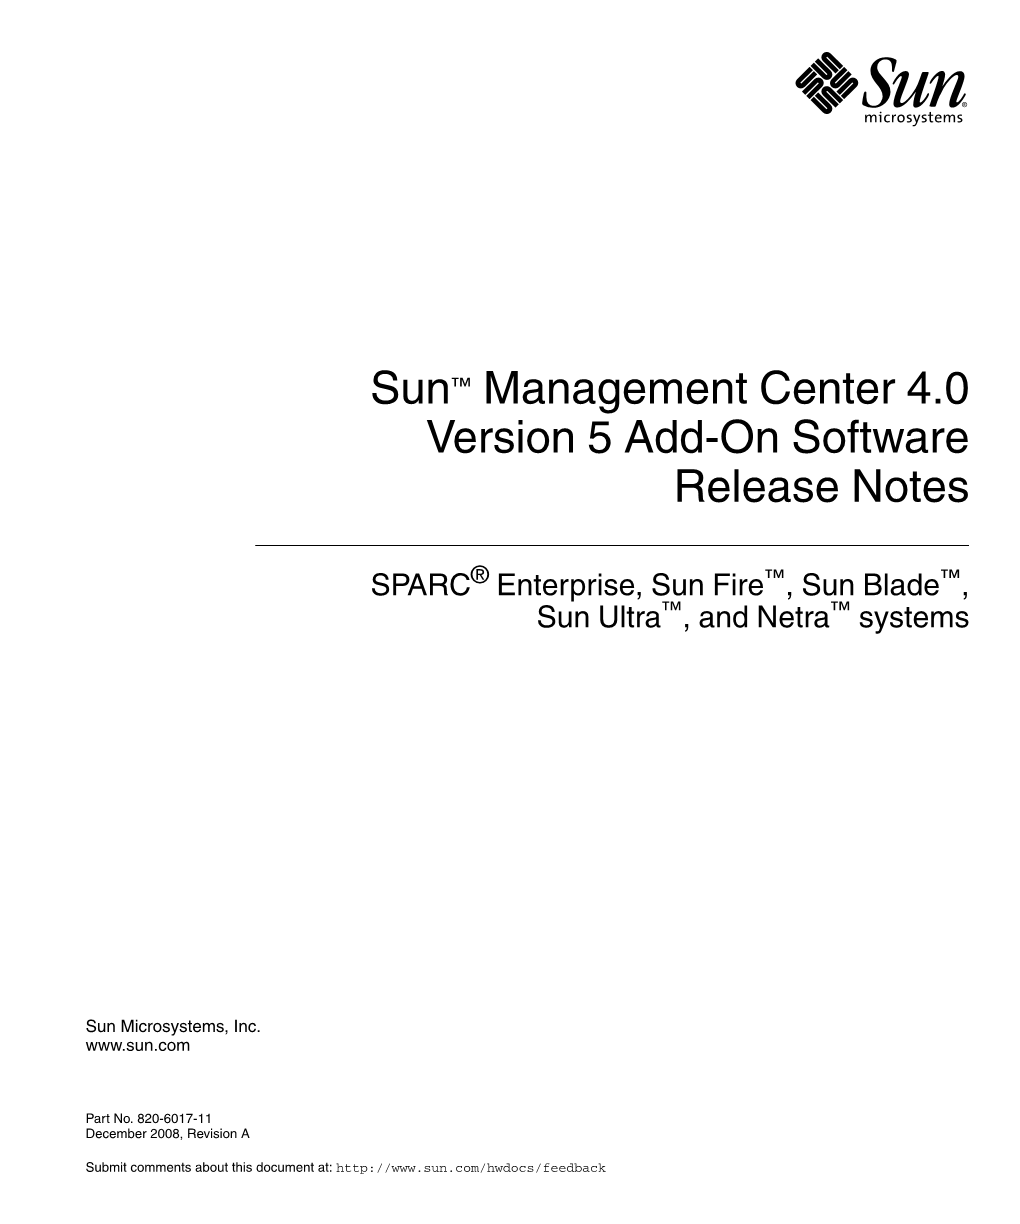 Sun Management Center 4.0 Version 5 Add-On Software Release Notes